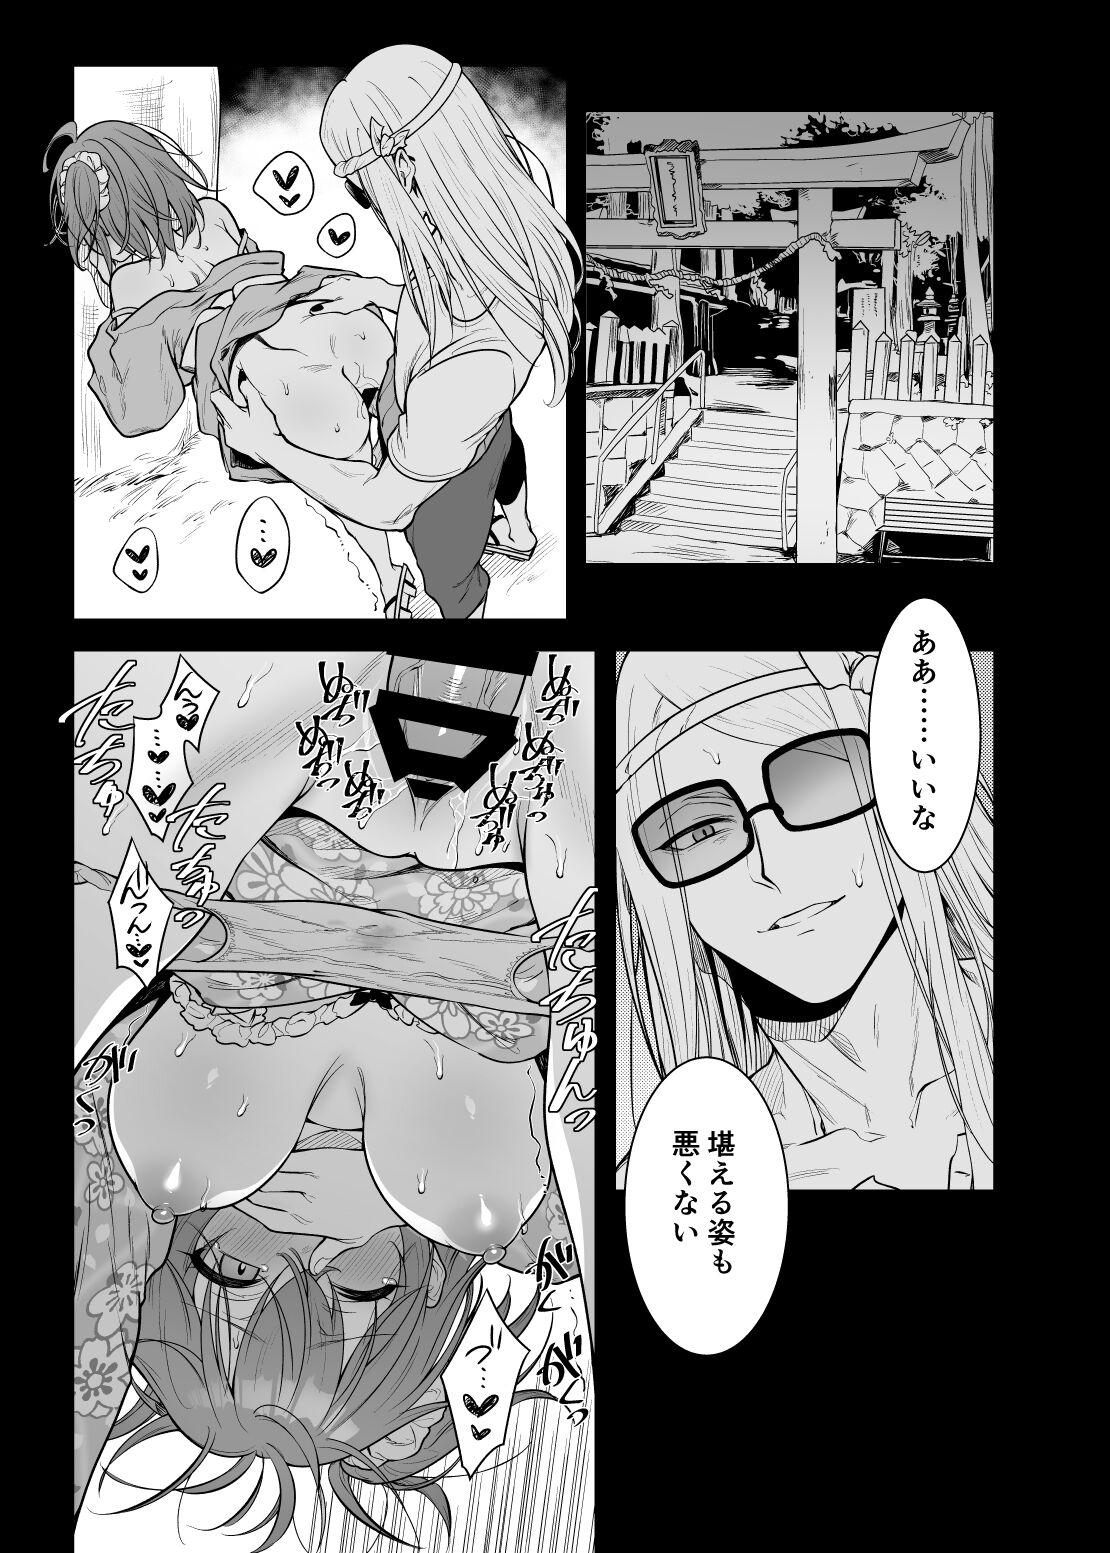 Camgirl PocaGuda Matome 2 - Fate grand order Gay Kissing - Page 2